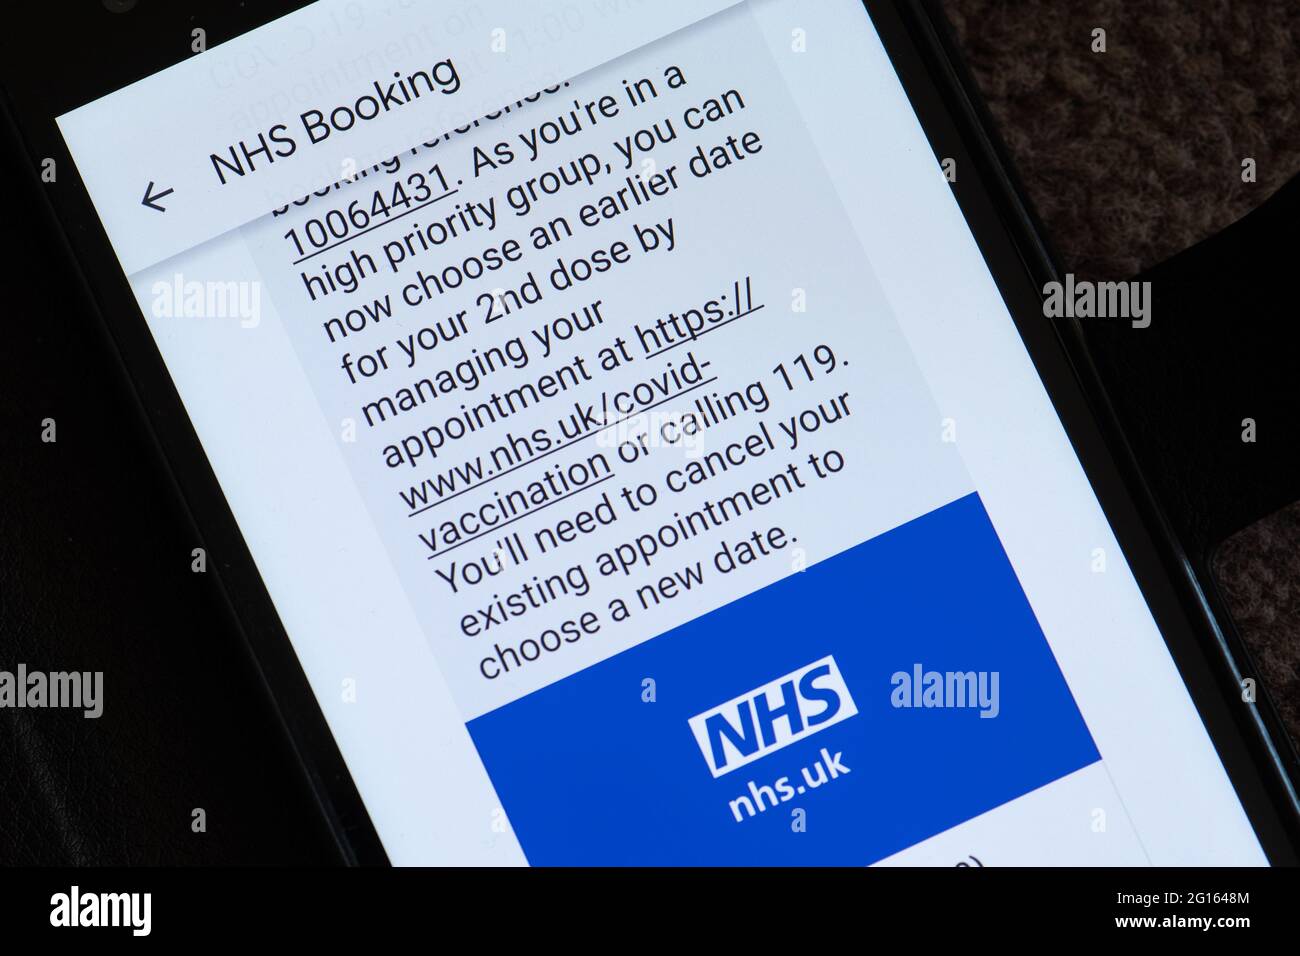 Text message from NHS advising to book an earlier appointment for 2nd covid vaccination as in high priority group (over 50 years old), UK, June 2021 Stock Photo